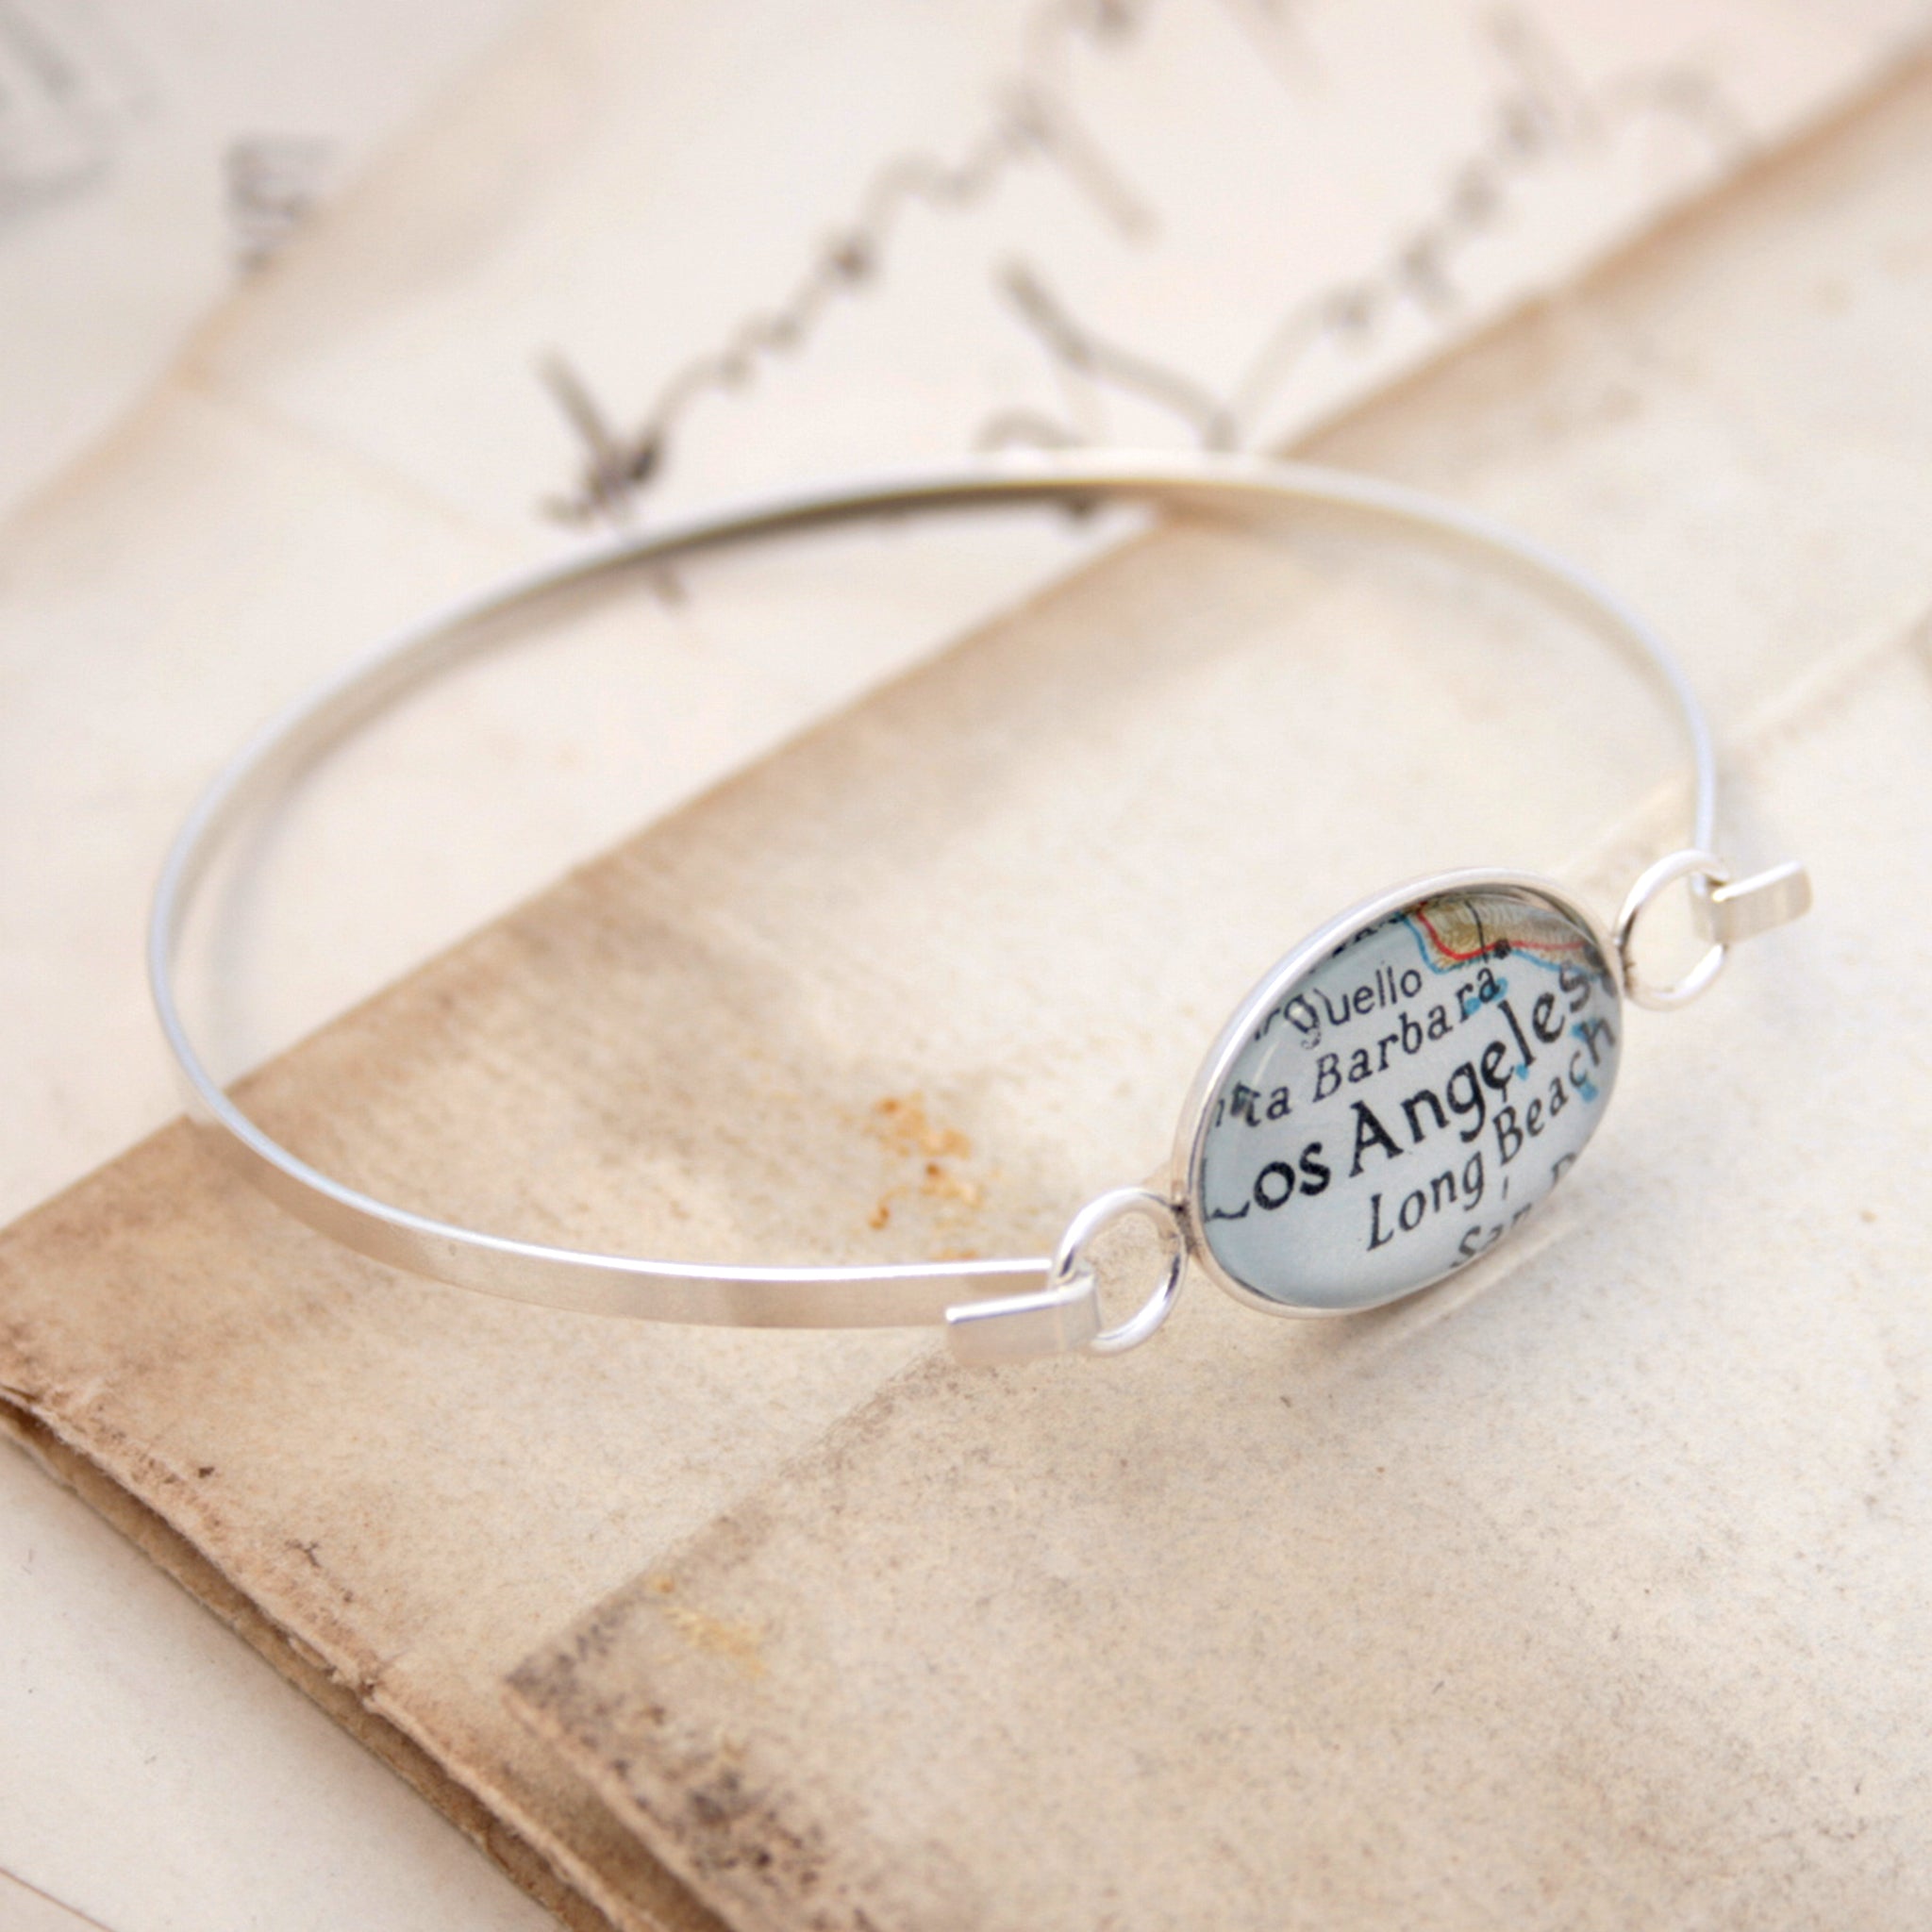 Sterling silver bangle bracelet featuring map of Los Angeles